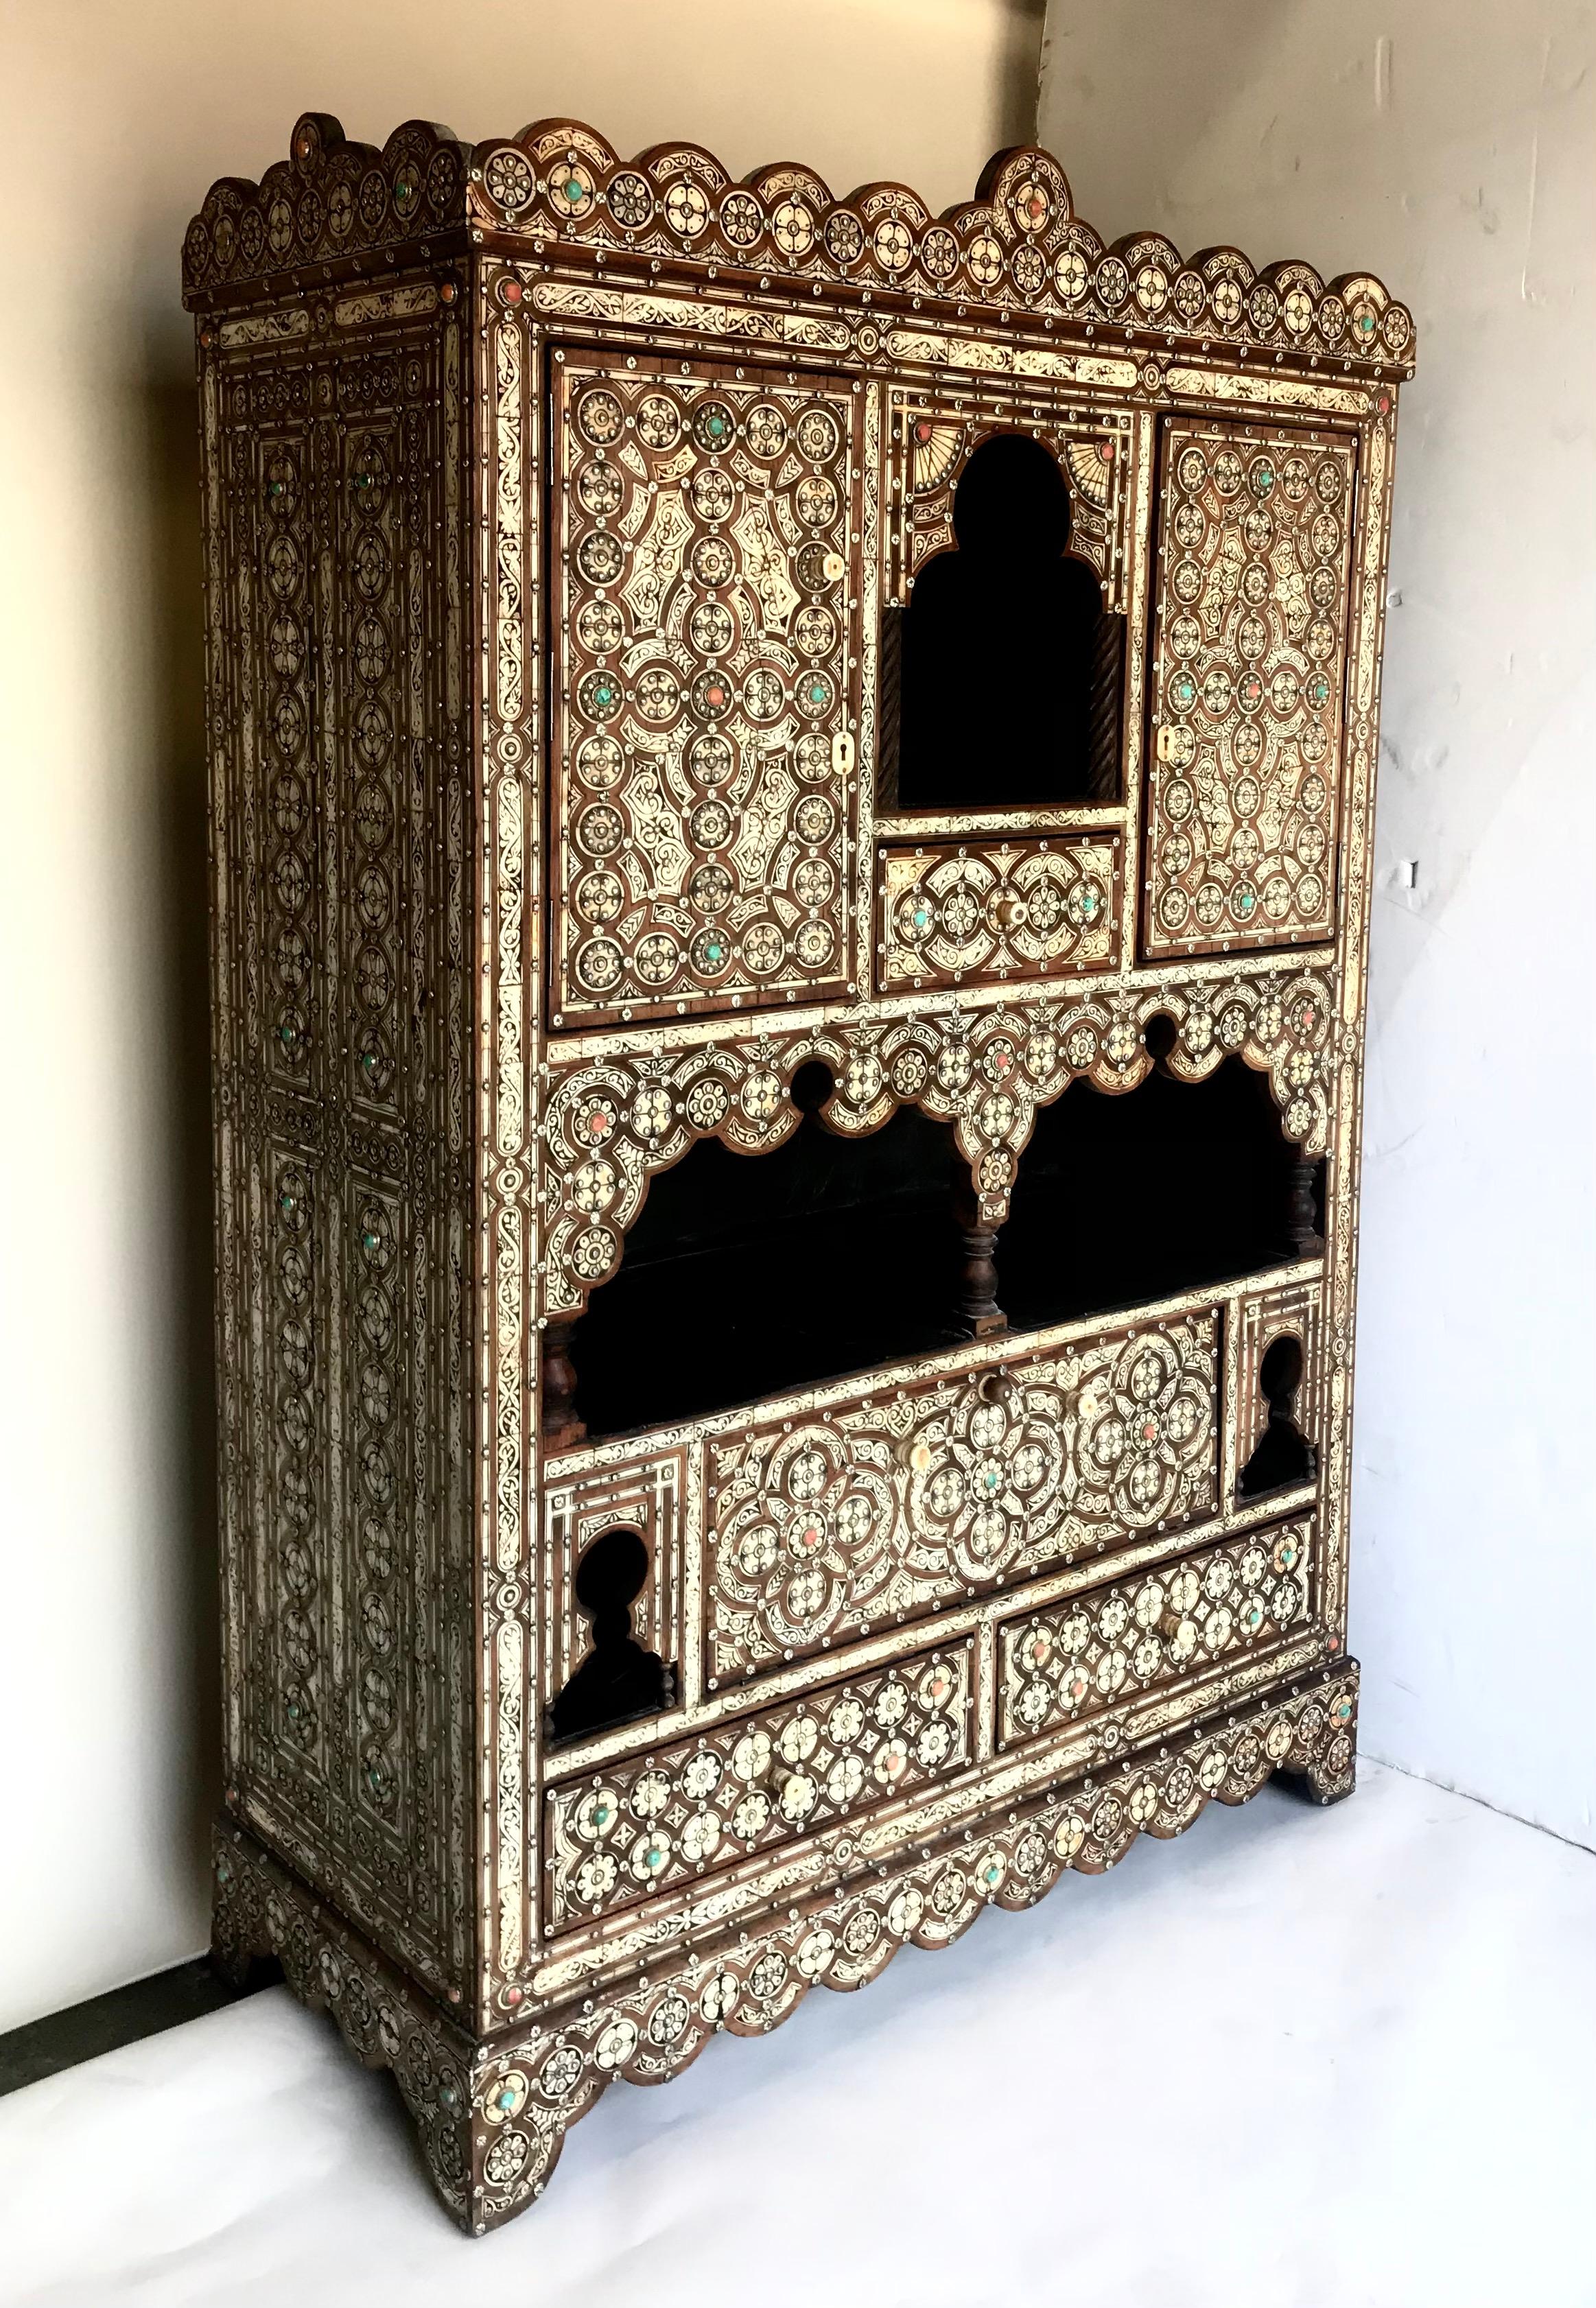 Vintage Moroccan inlay cabinet with Moorish arches and details. This inlay artwork is constructed with light color bone, darker wood and silver studs, making intricate patterns. It is a striking piece. Interior is lined in black leather.
There are